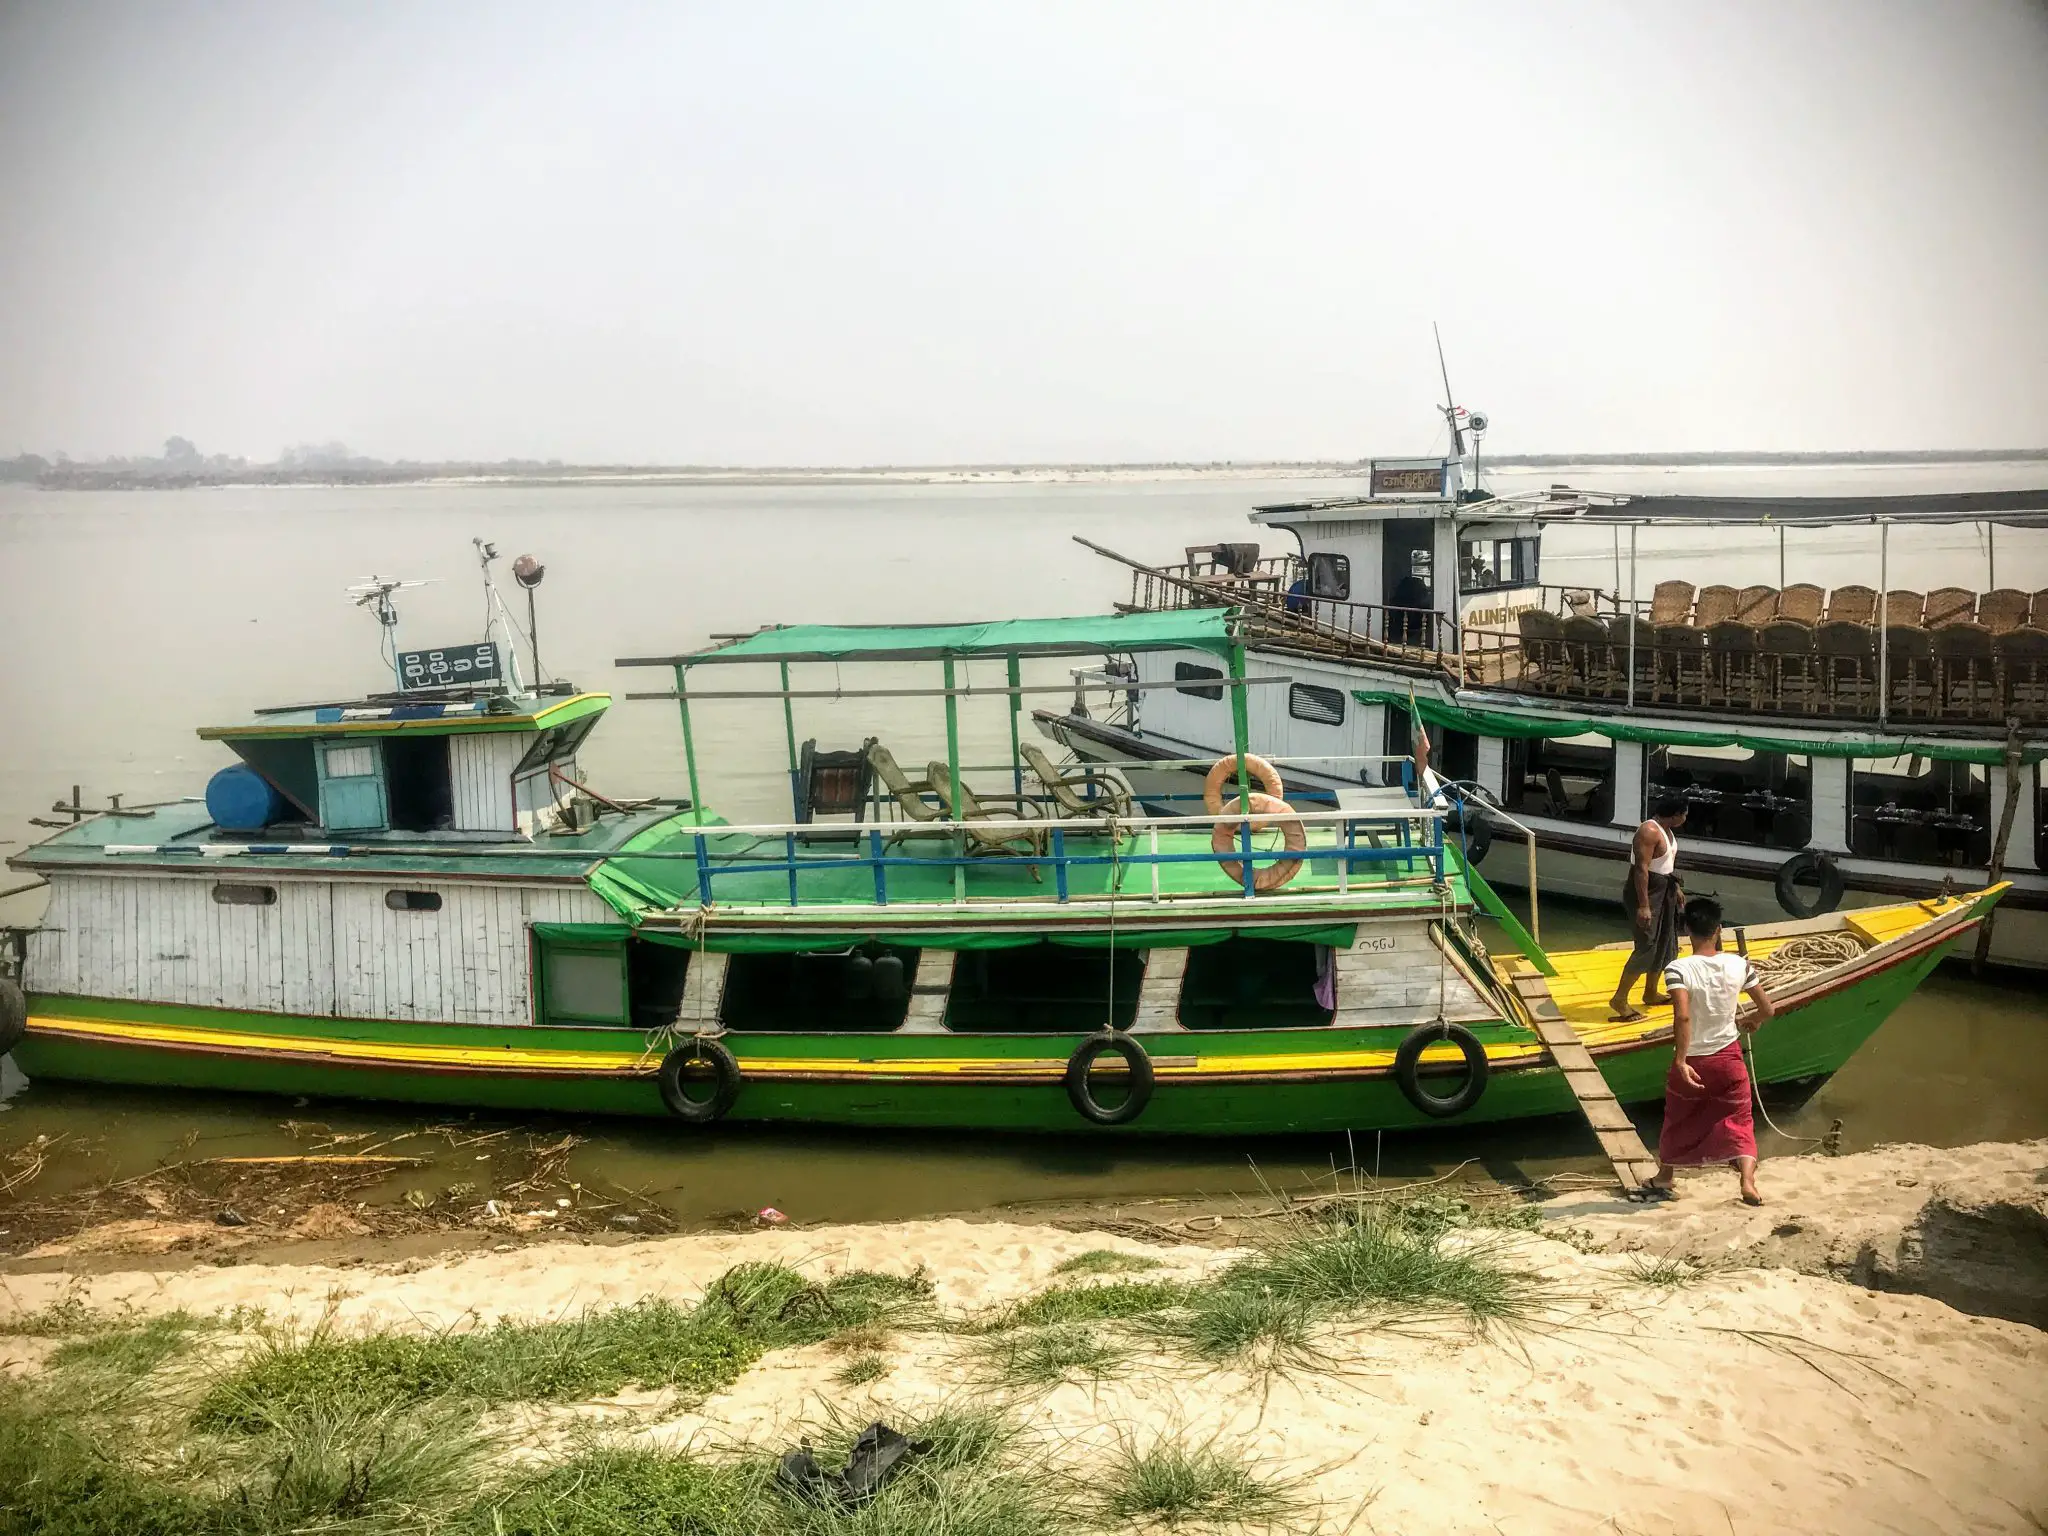 Boats that go from Mandalay to Mingun, Myanmar